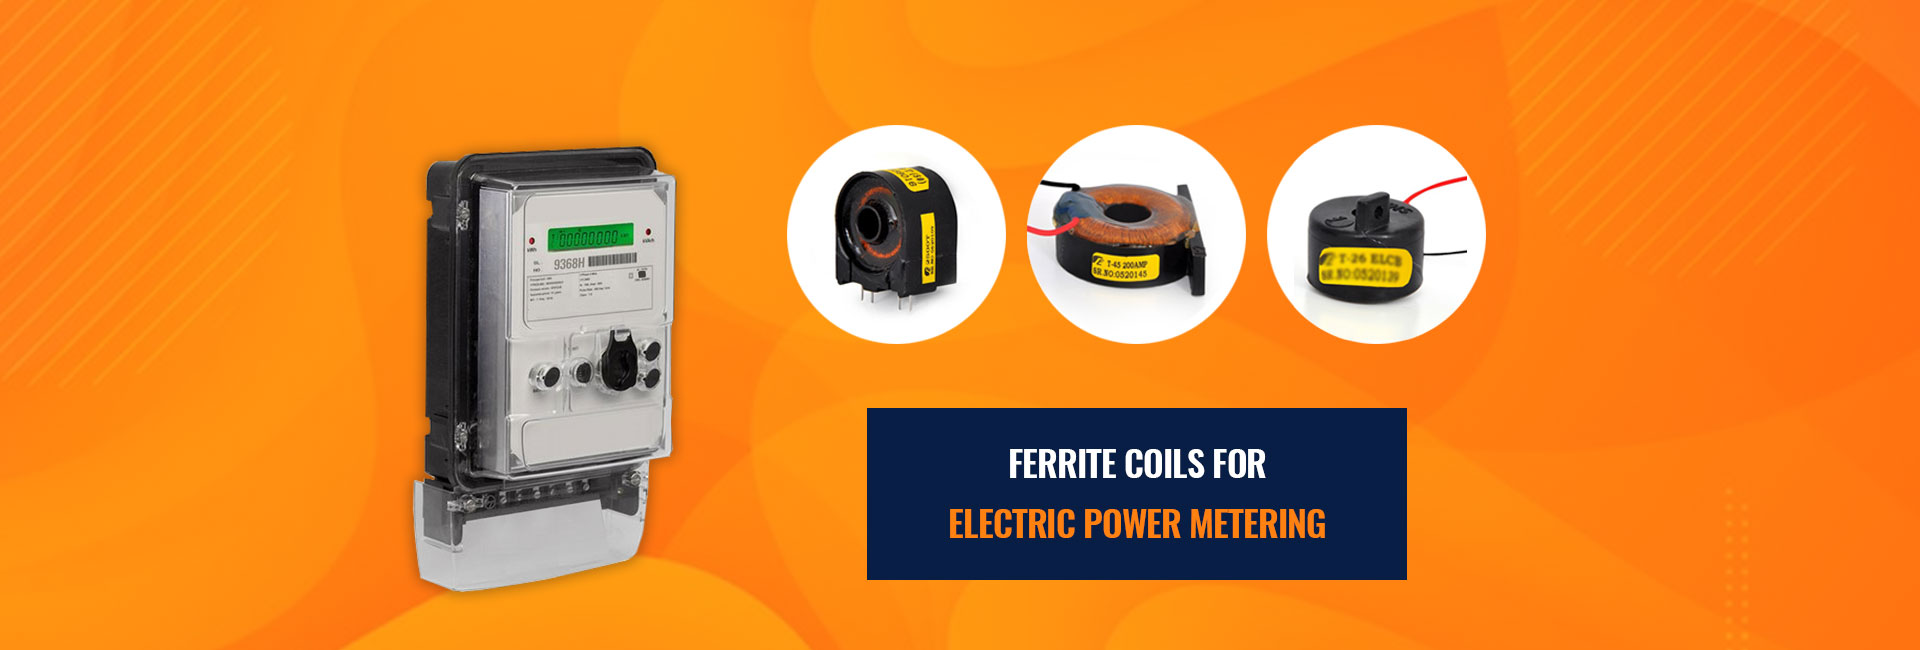 Ferrite Coils for Electric Power Metering